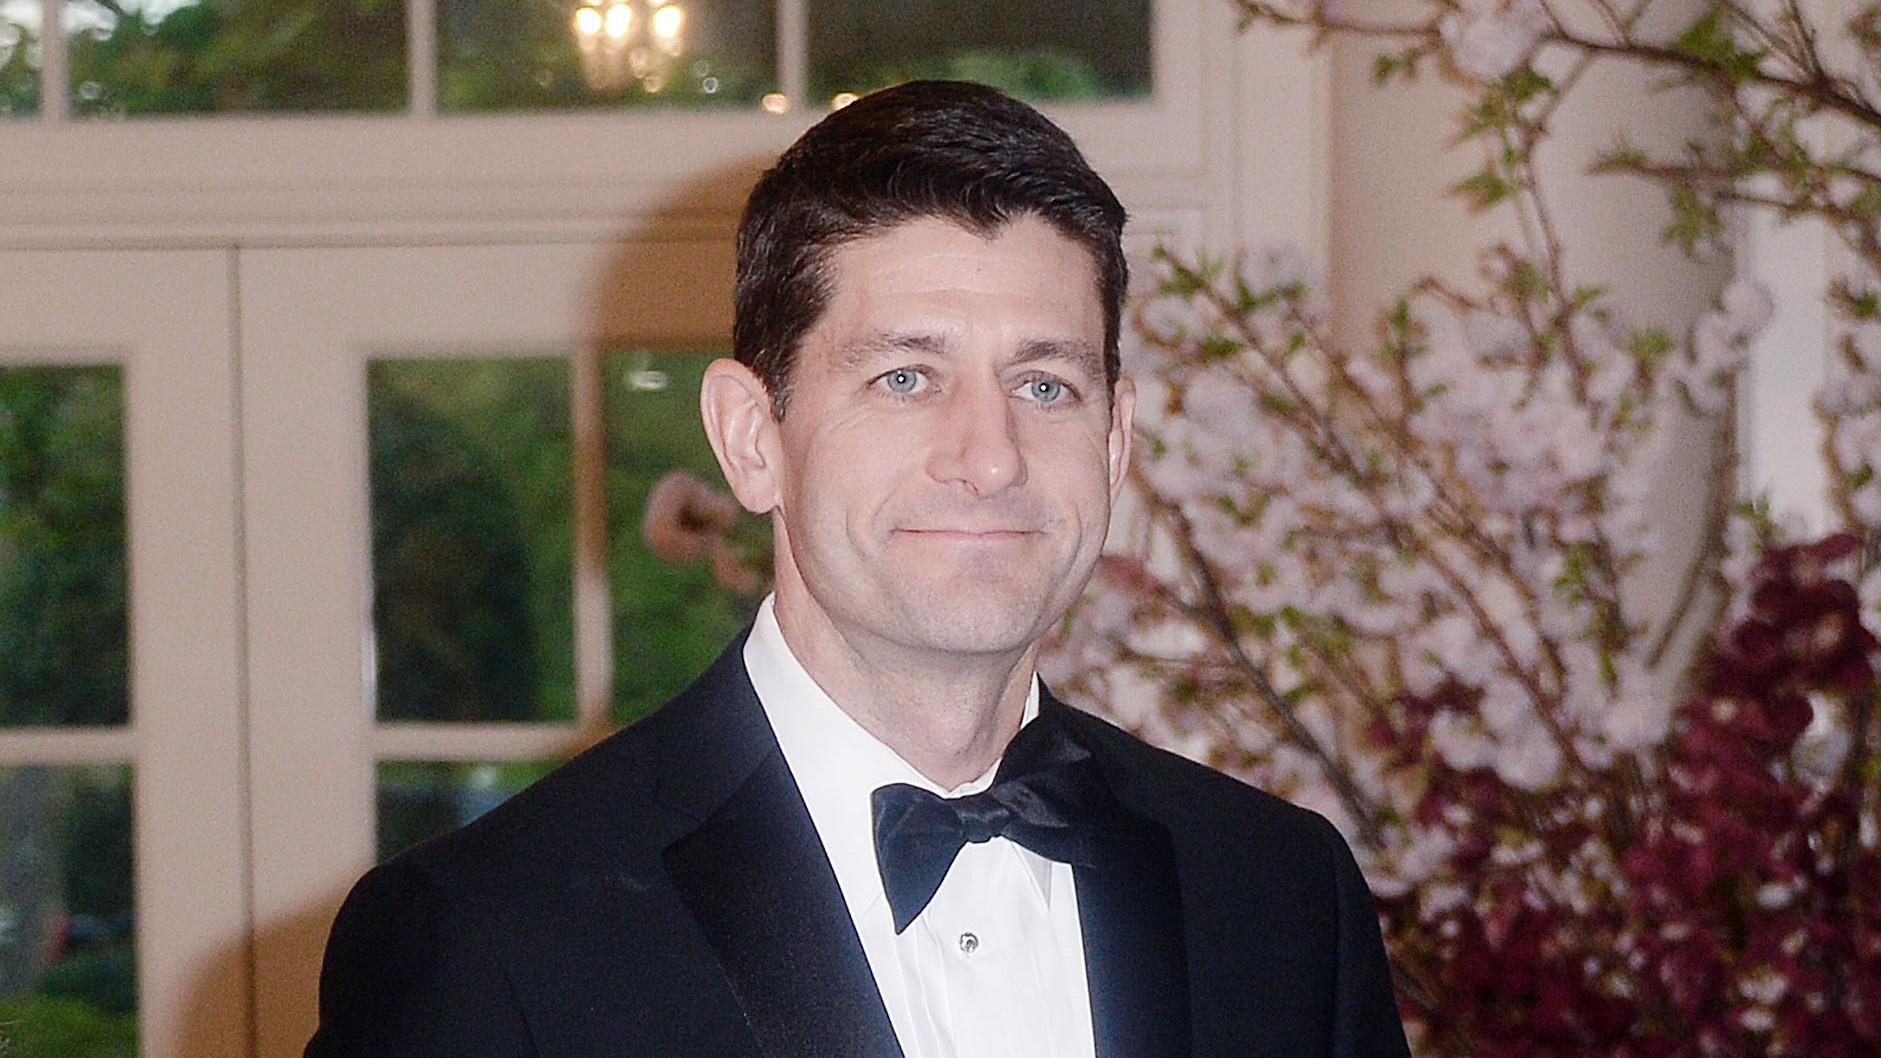 Paul Ryan's Net Worth 5 Fast Facts You Need to Know